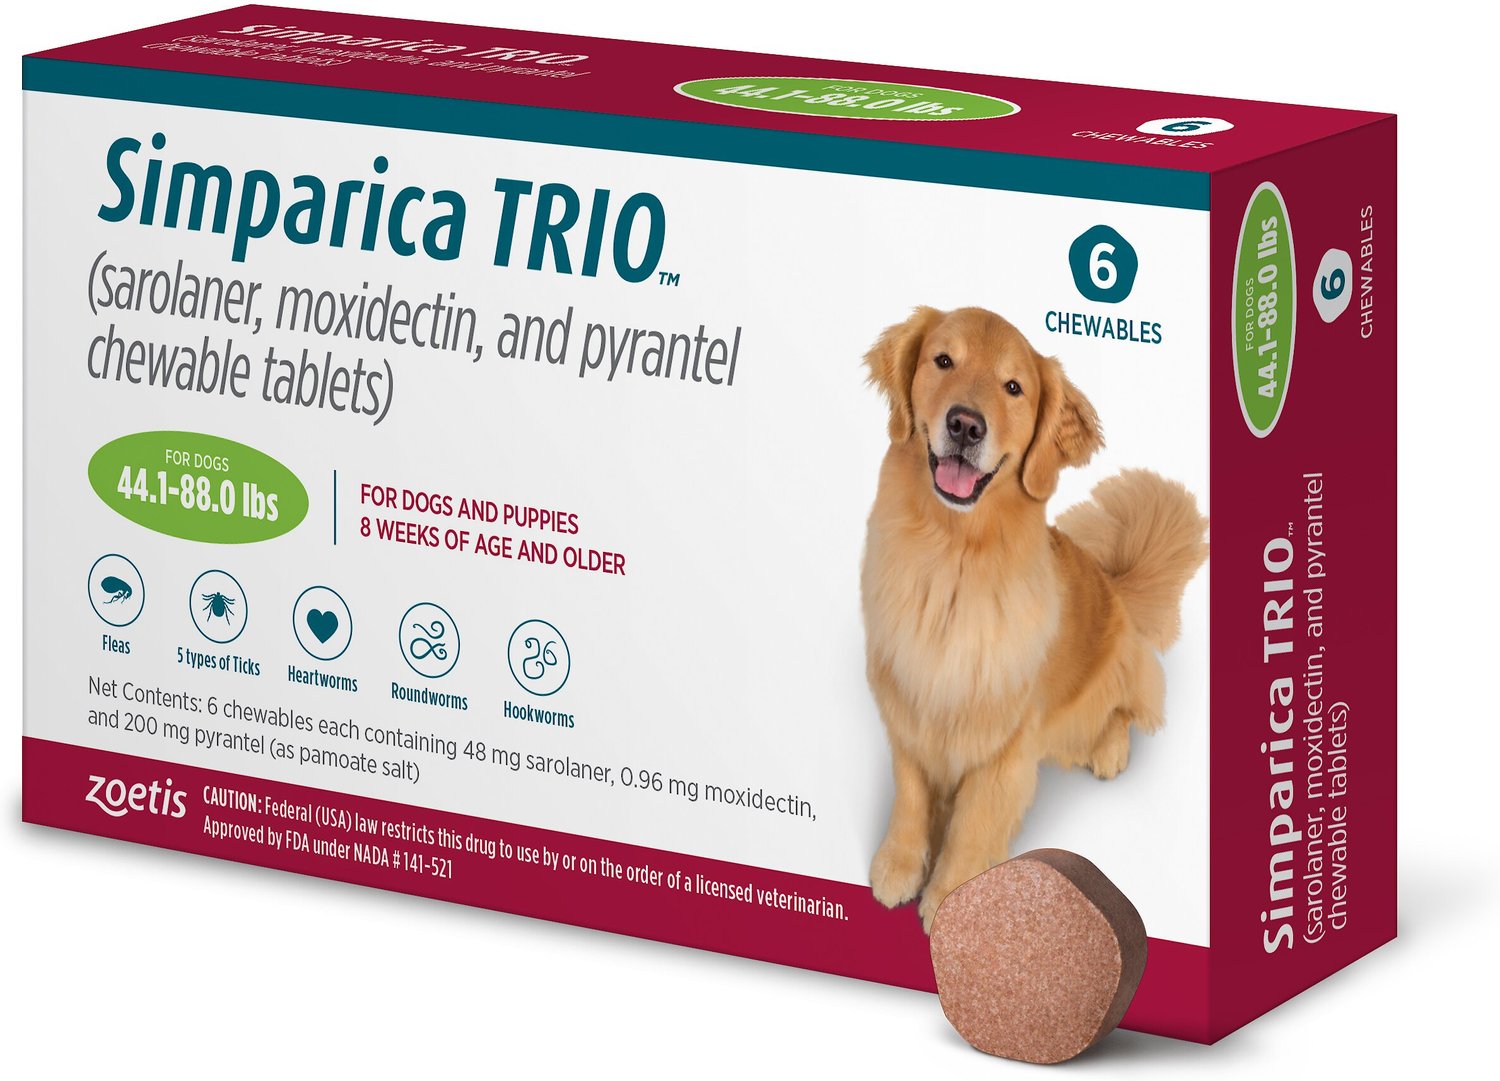 simparica-trio-chewable-tablets-for-dogs-44-1-88-lb-6-treatments-green-box-chewy